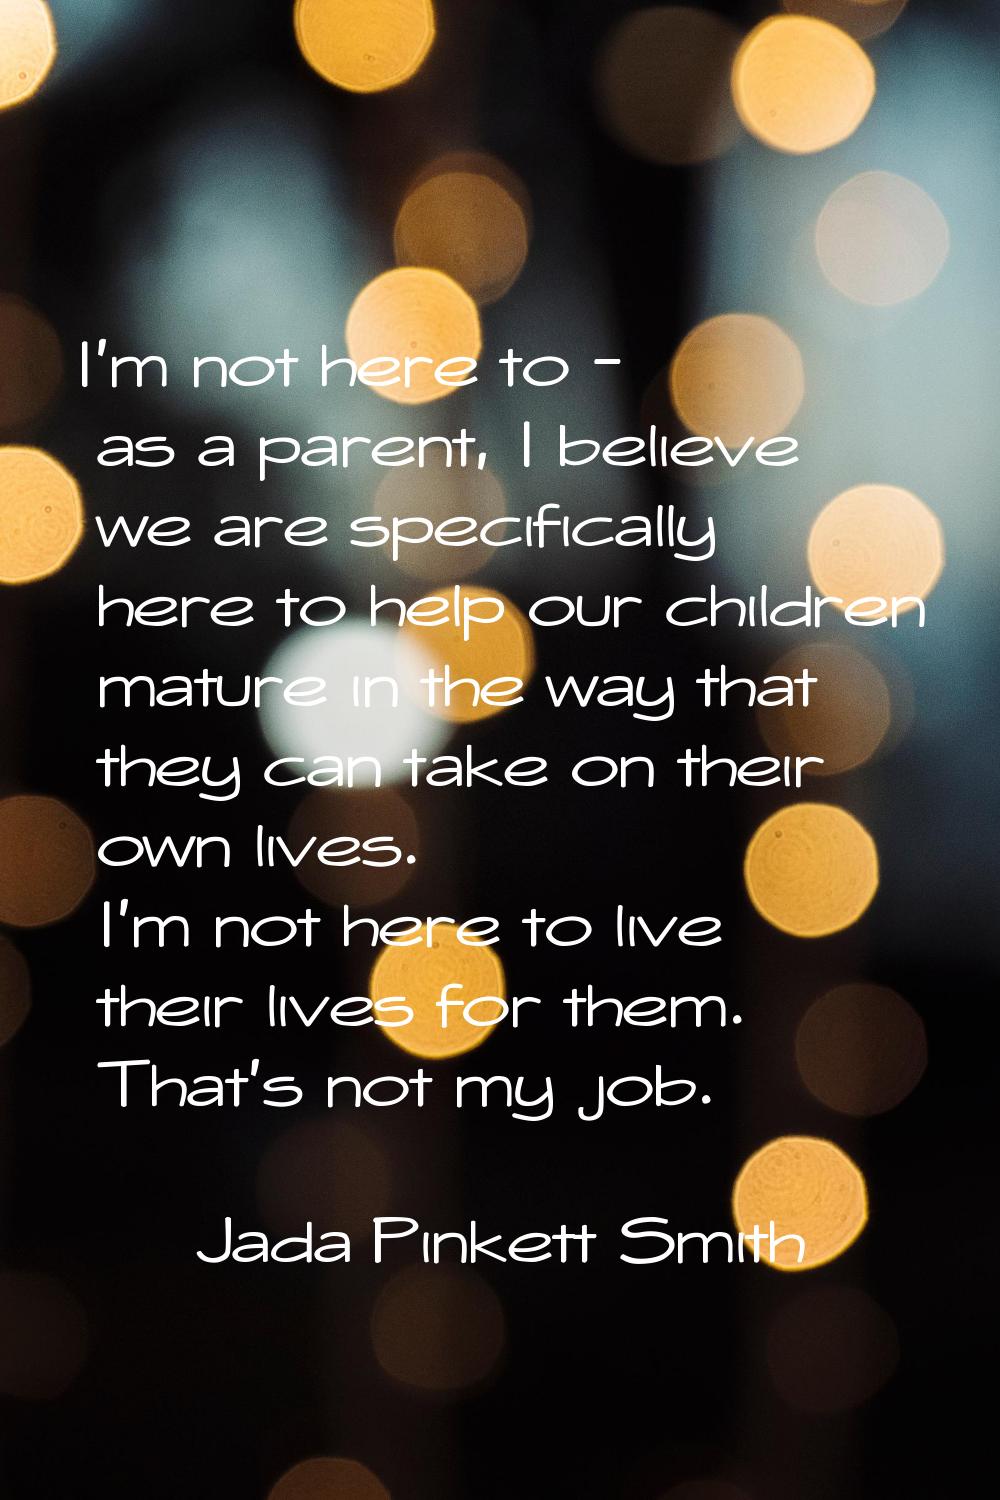 I'm not here to - as a parent, I believe we are specifically here to help our children mature in th